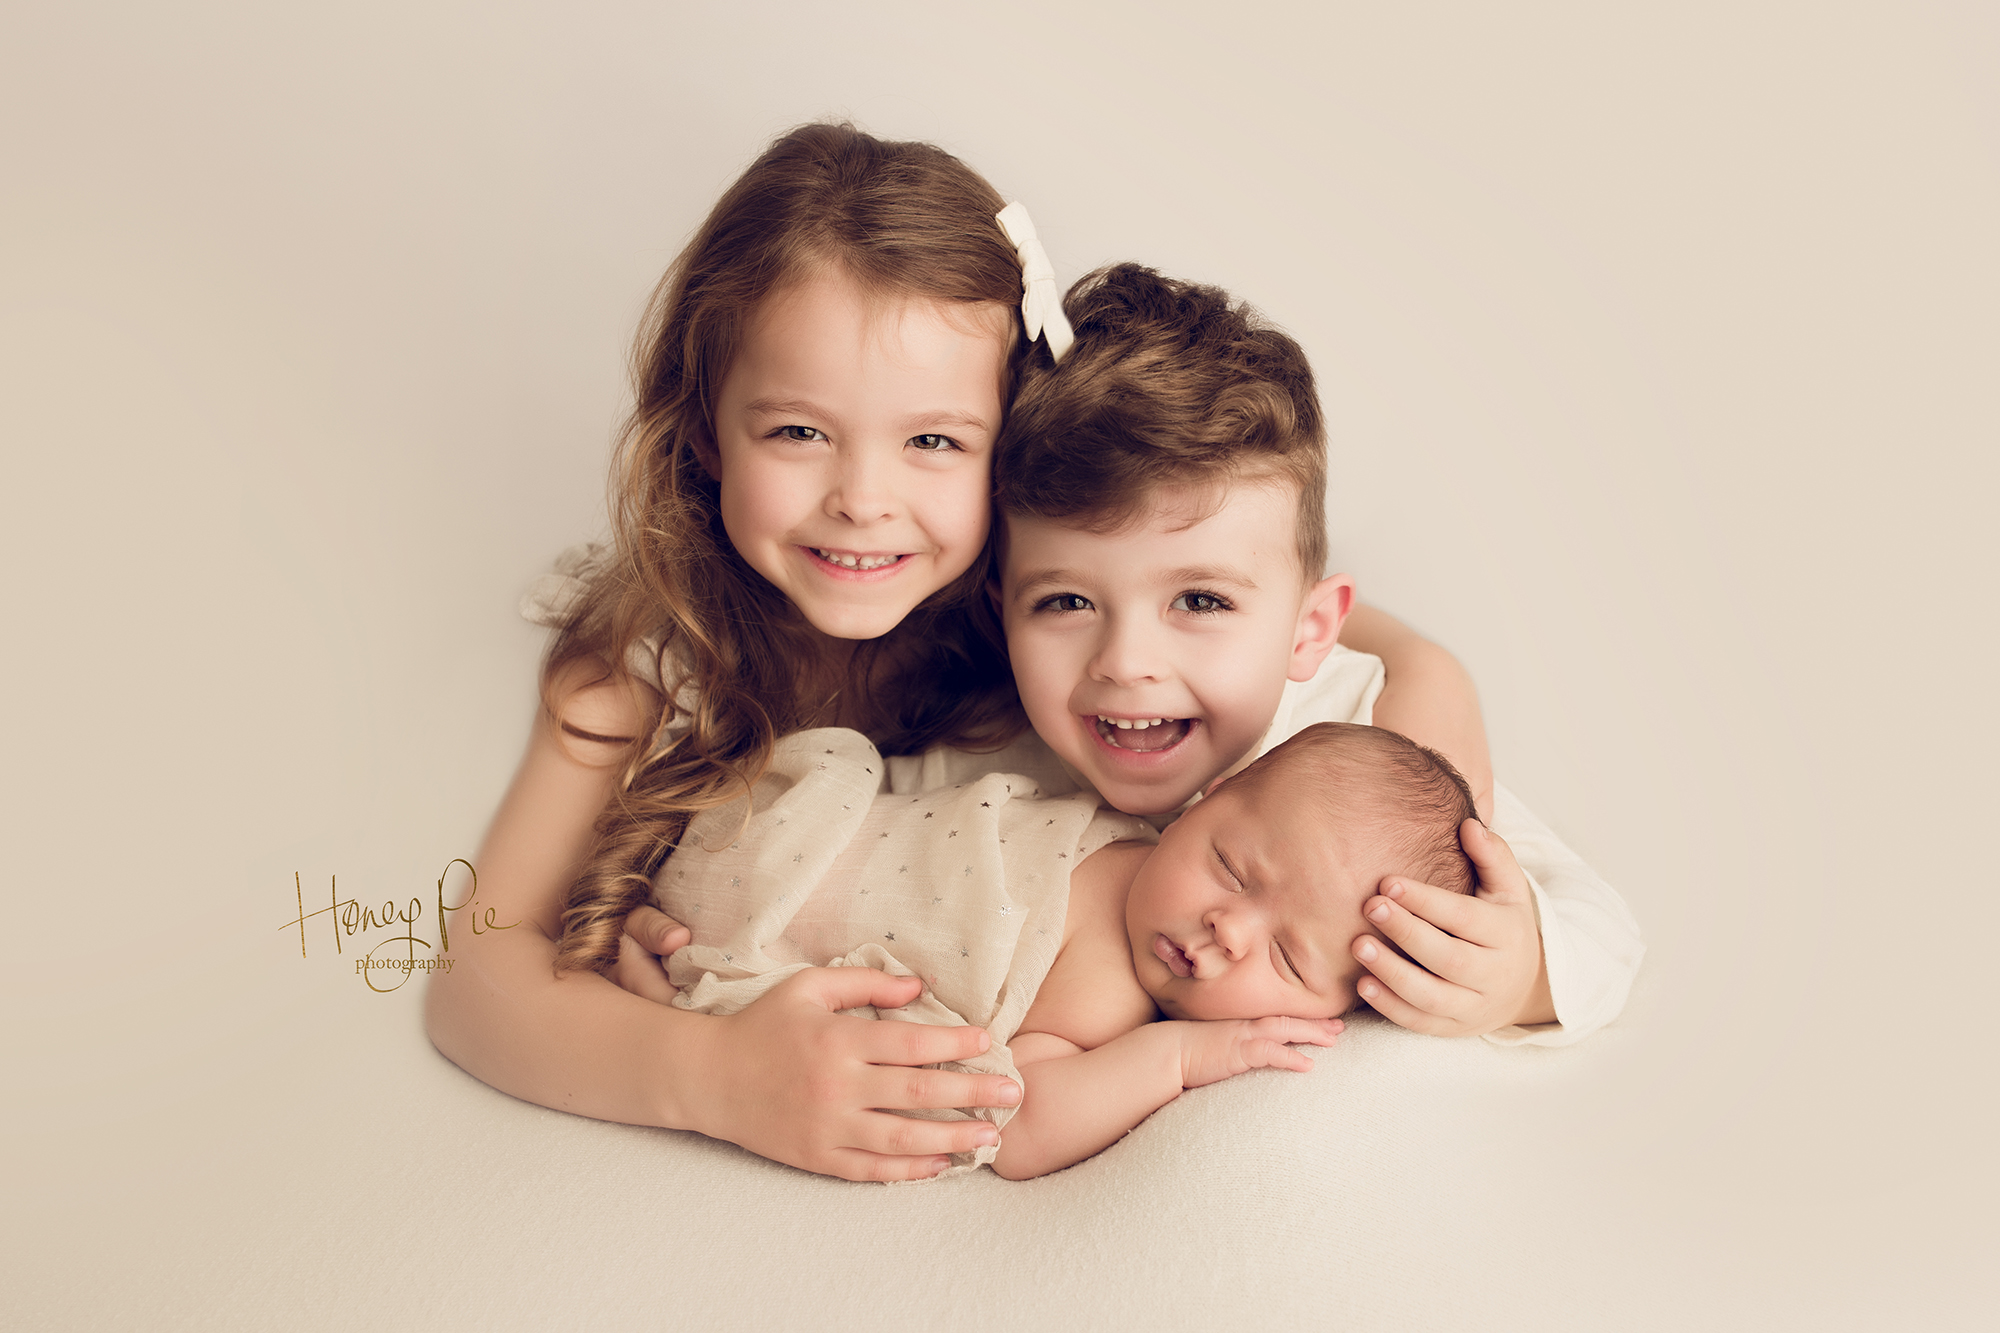 Sibling love with baby brother during newborn photoshoot